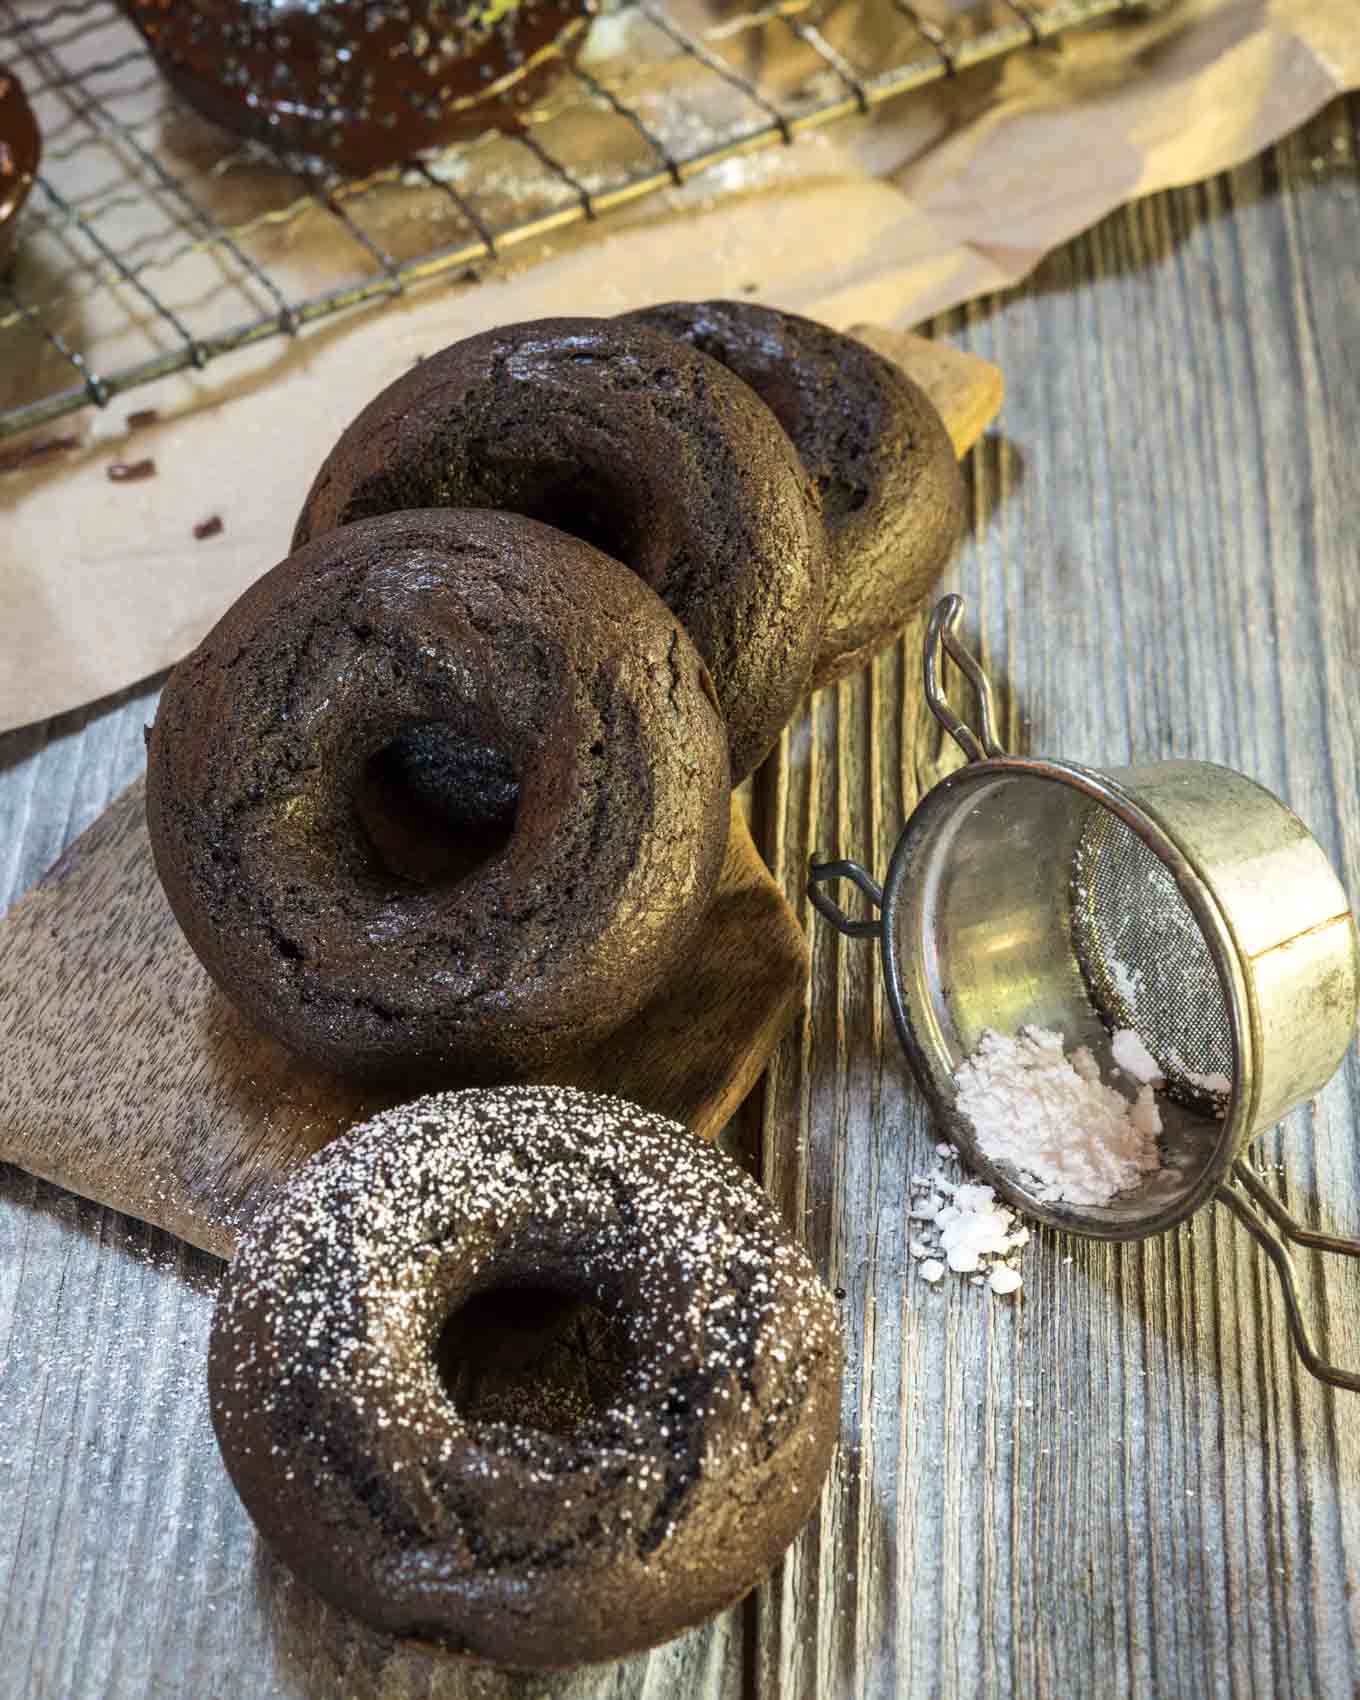 Thrde baked donuts leaning in a row. The front donut is sprinkled with powdered sugar next to an antique sifter.